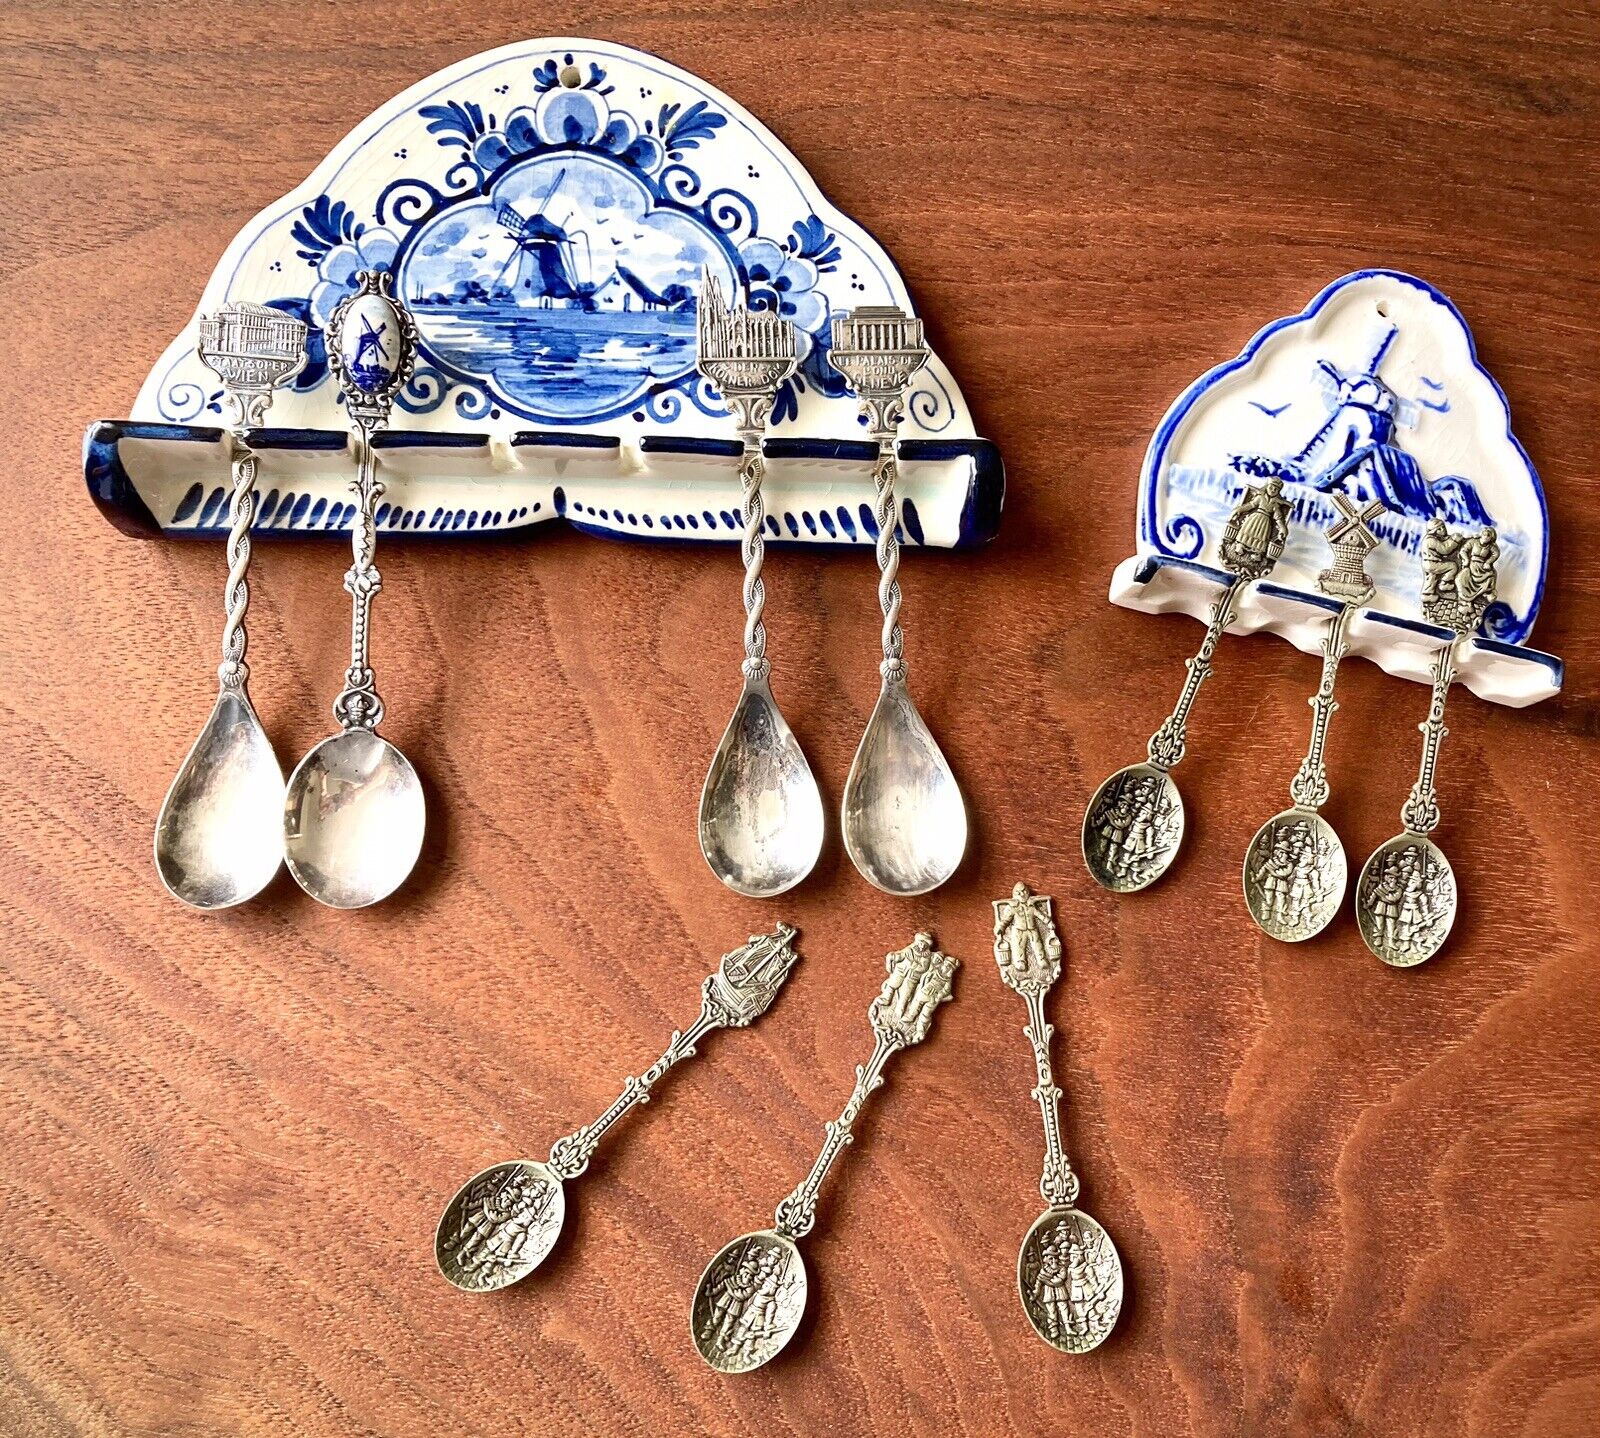 2 Vtg Holland Delph Spoon Holders W/ 10 Collectible Windmill/Dutch Scene Spoons